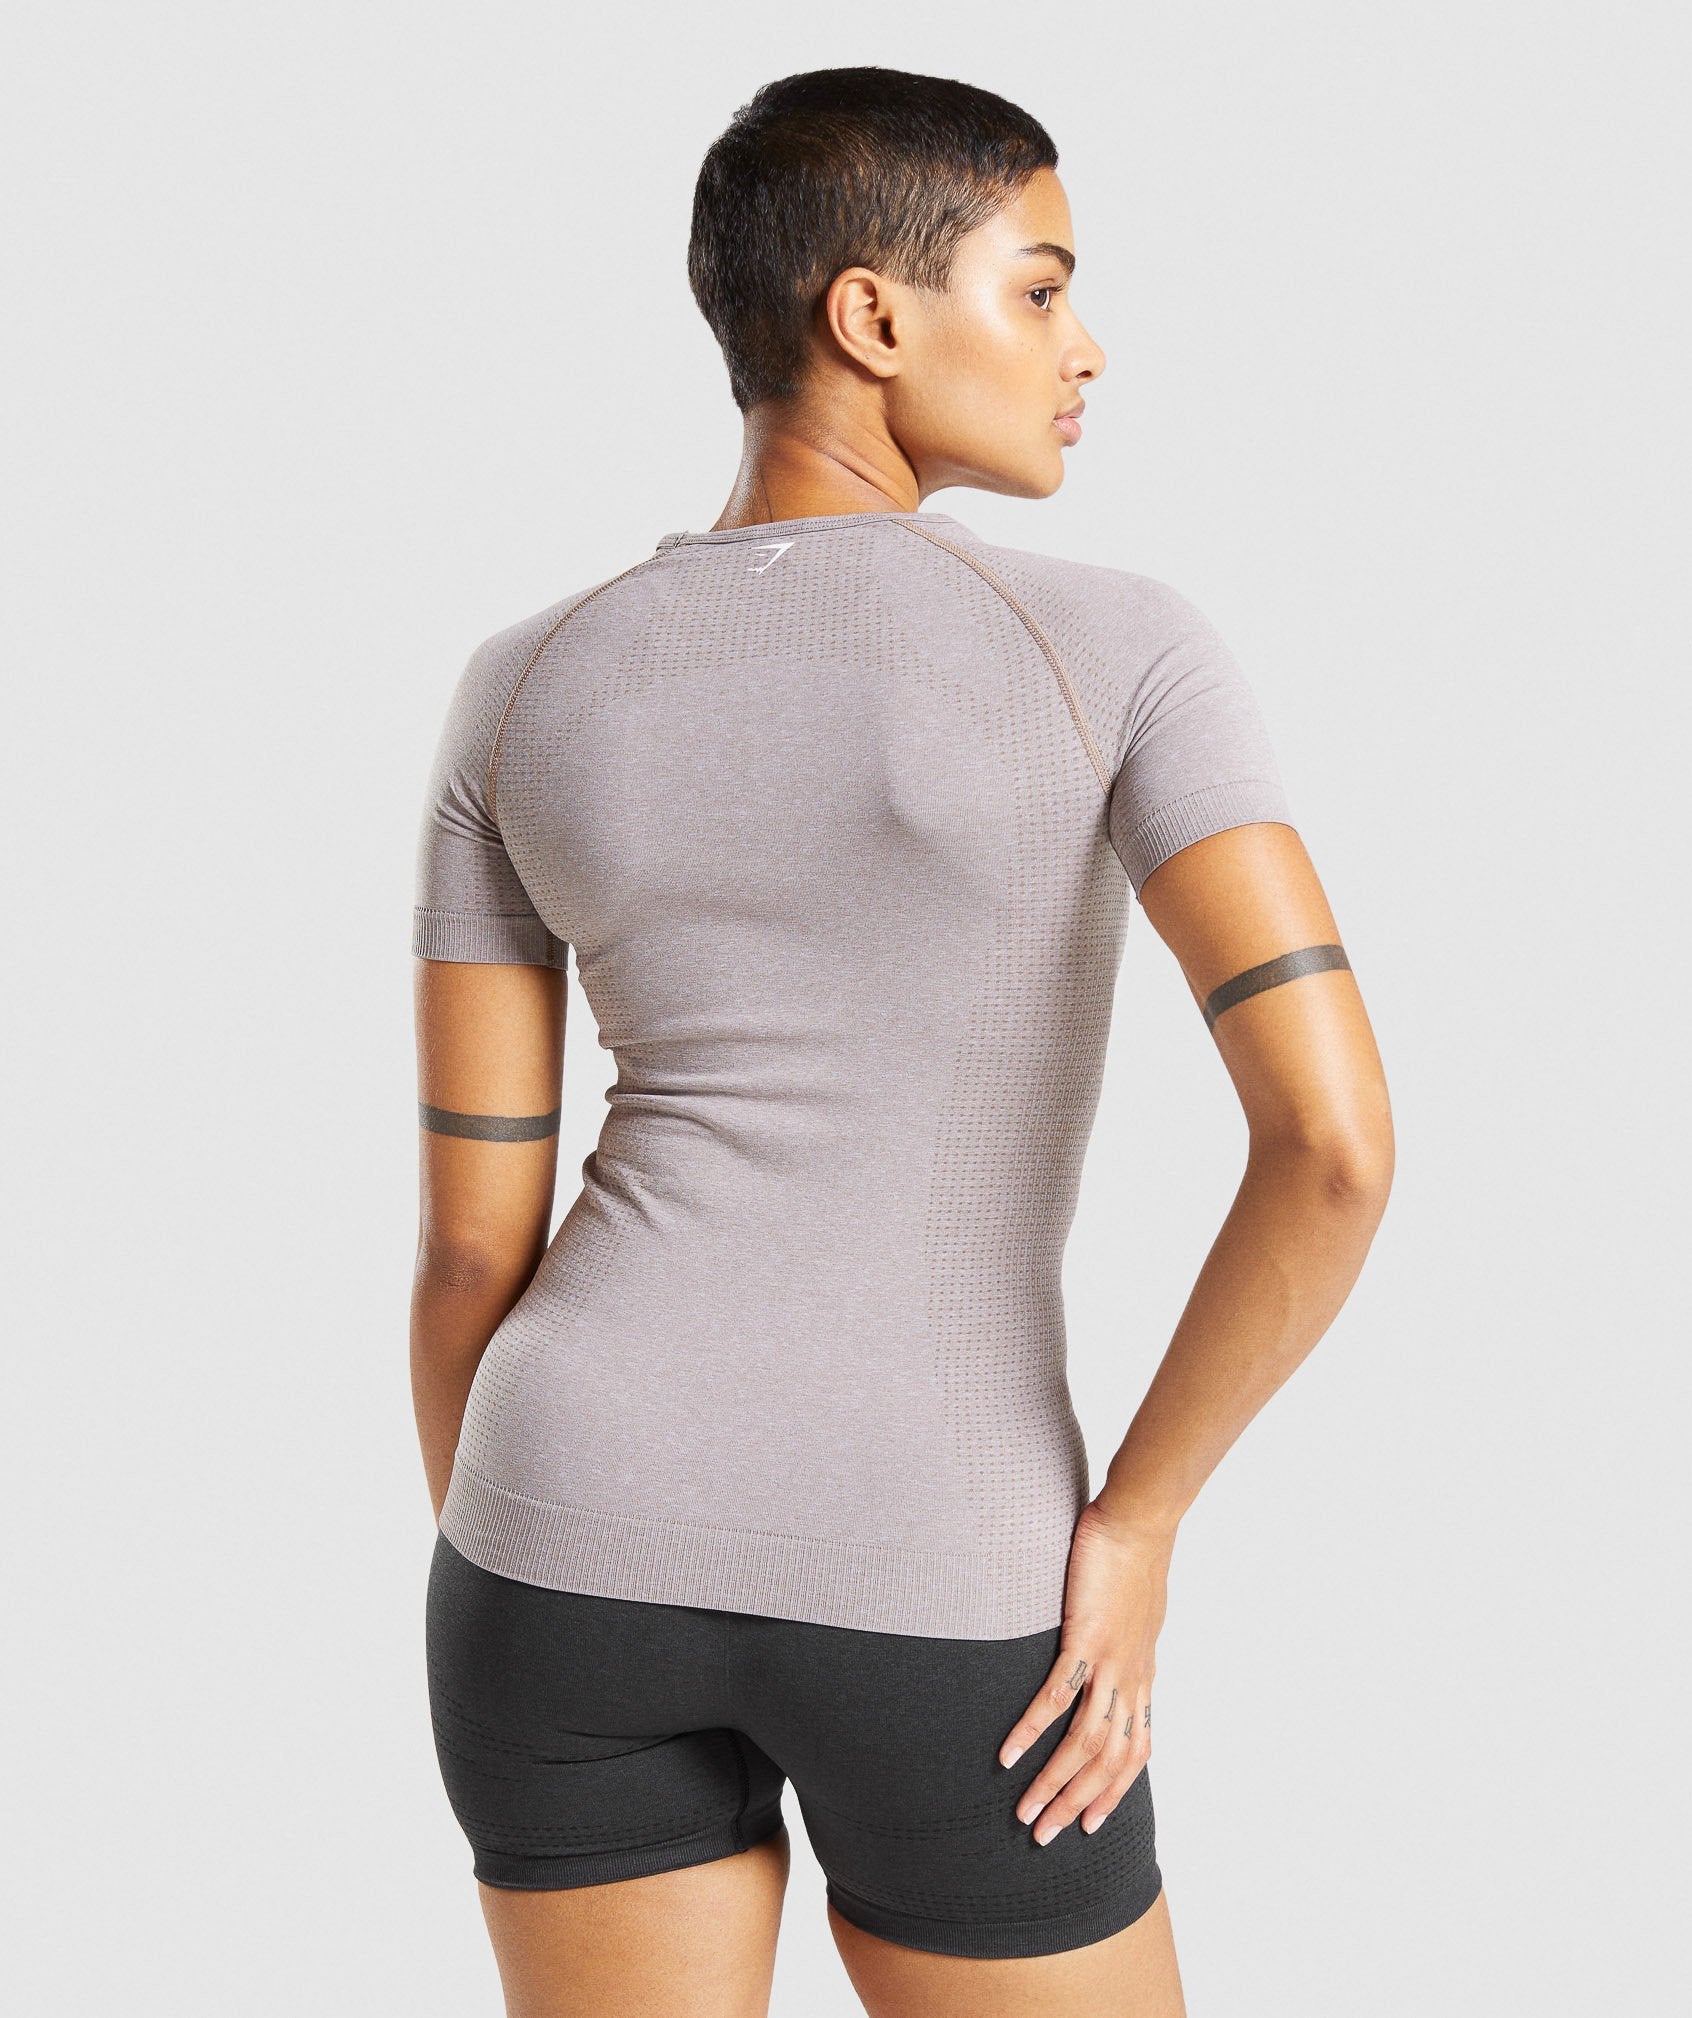 Vital Seamless 2.0 T-Shirt in Taupe Marl - view 2